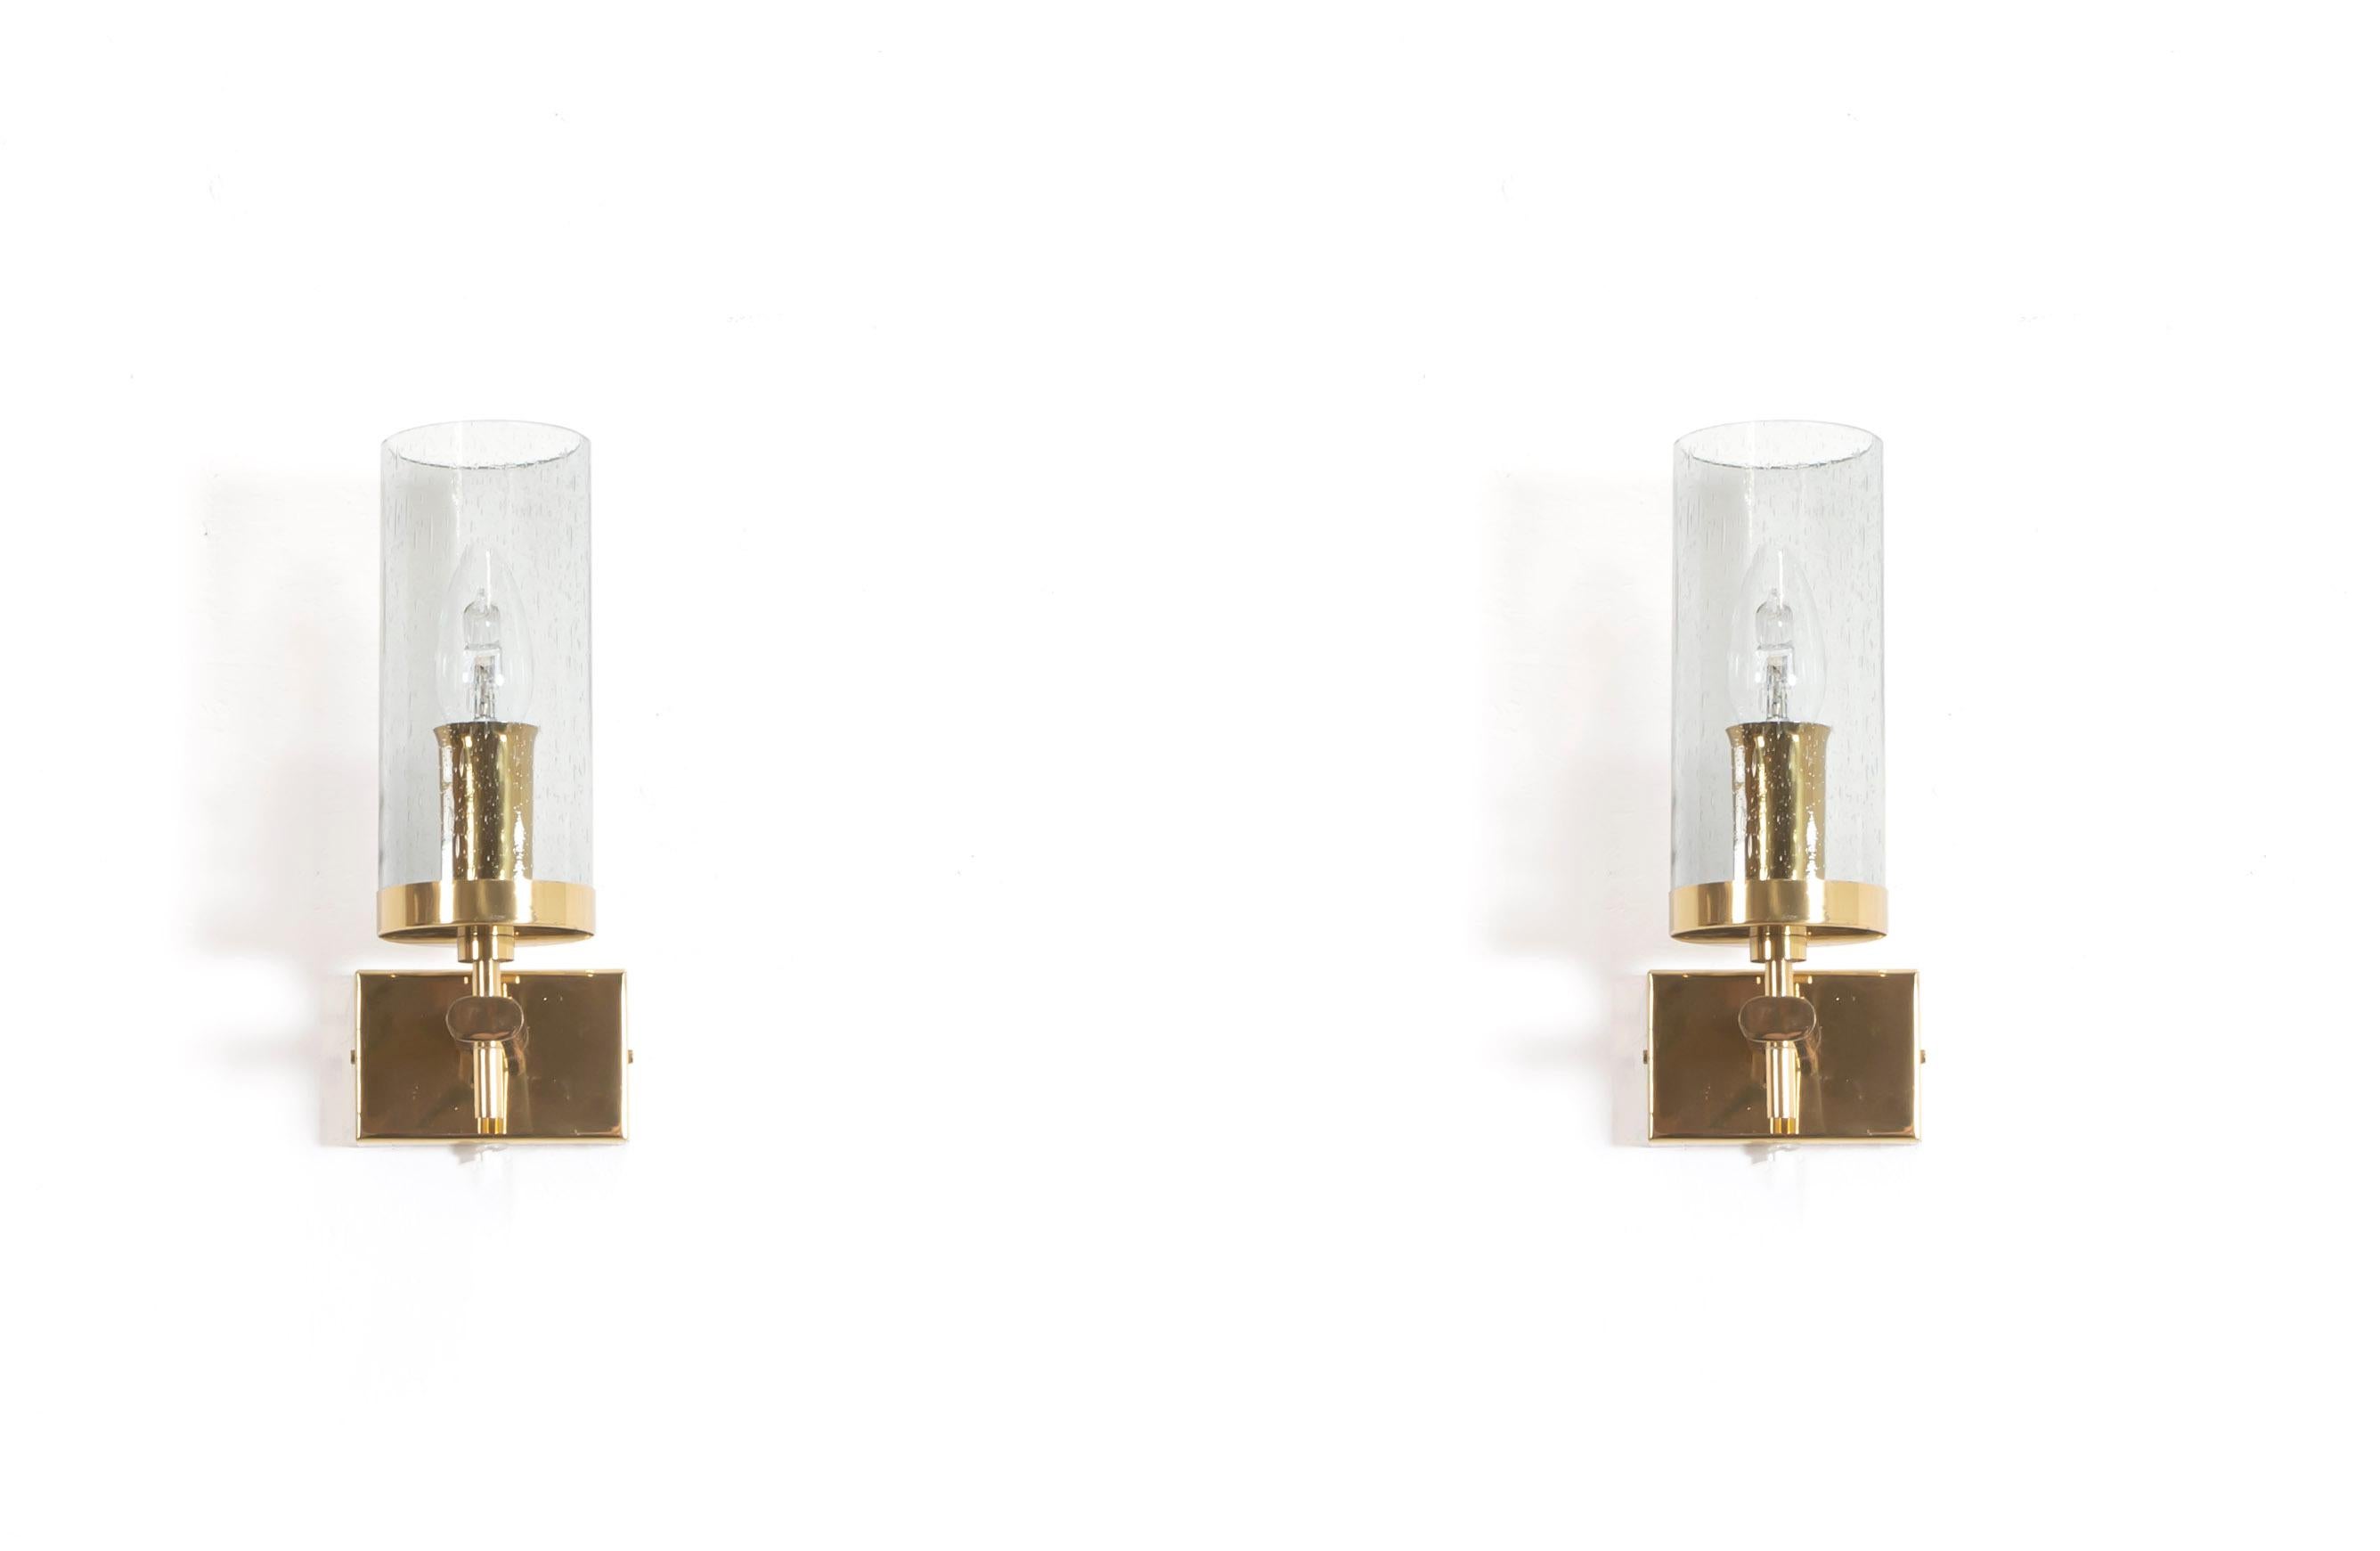 Decorative wall lights in brass and shades in smoked glass. Designed and made in Norway by Bison from circa 1970s first half. Both lamps are fully working and in very good vintage condition. The lamps are using an E14 bulb with a max wattage of 40.